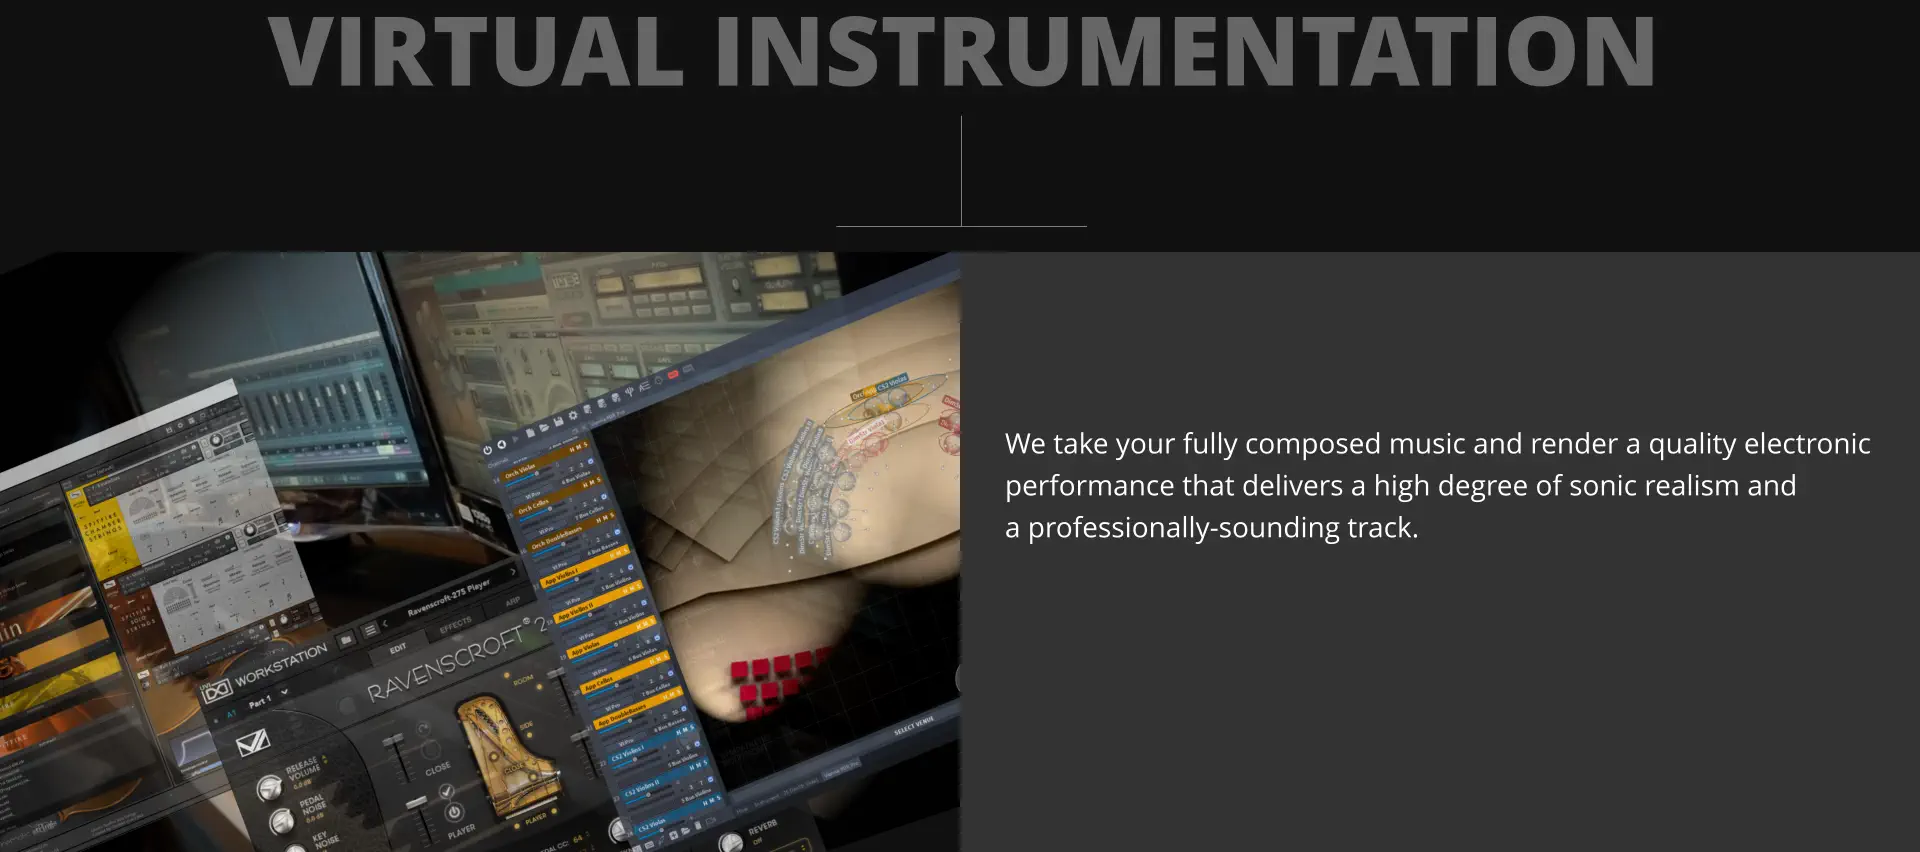 VIRTUAL INSTRUMENTATION We take your fully composed music and render a quality electronic performance that delivers a high degree of sonic realism and a professionally-sounding track.